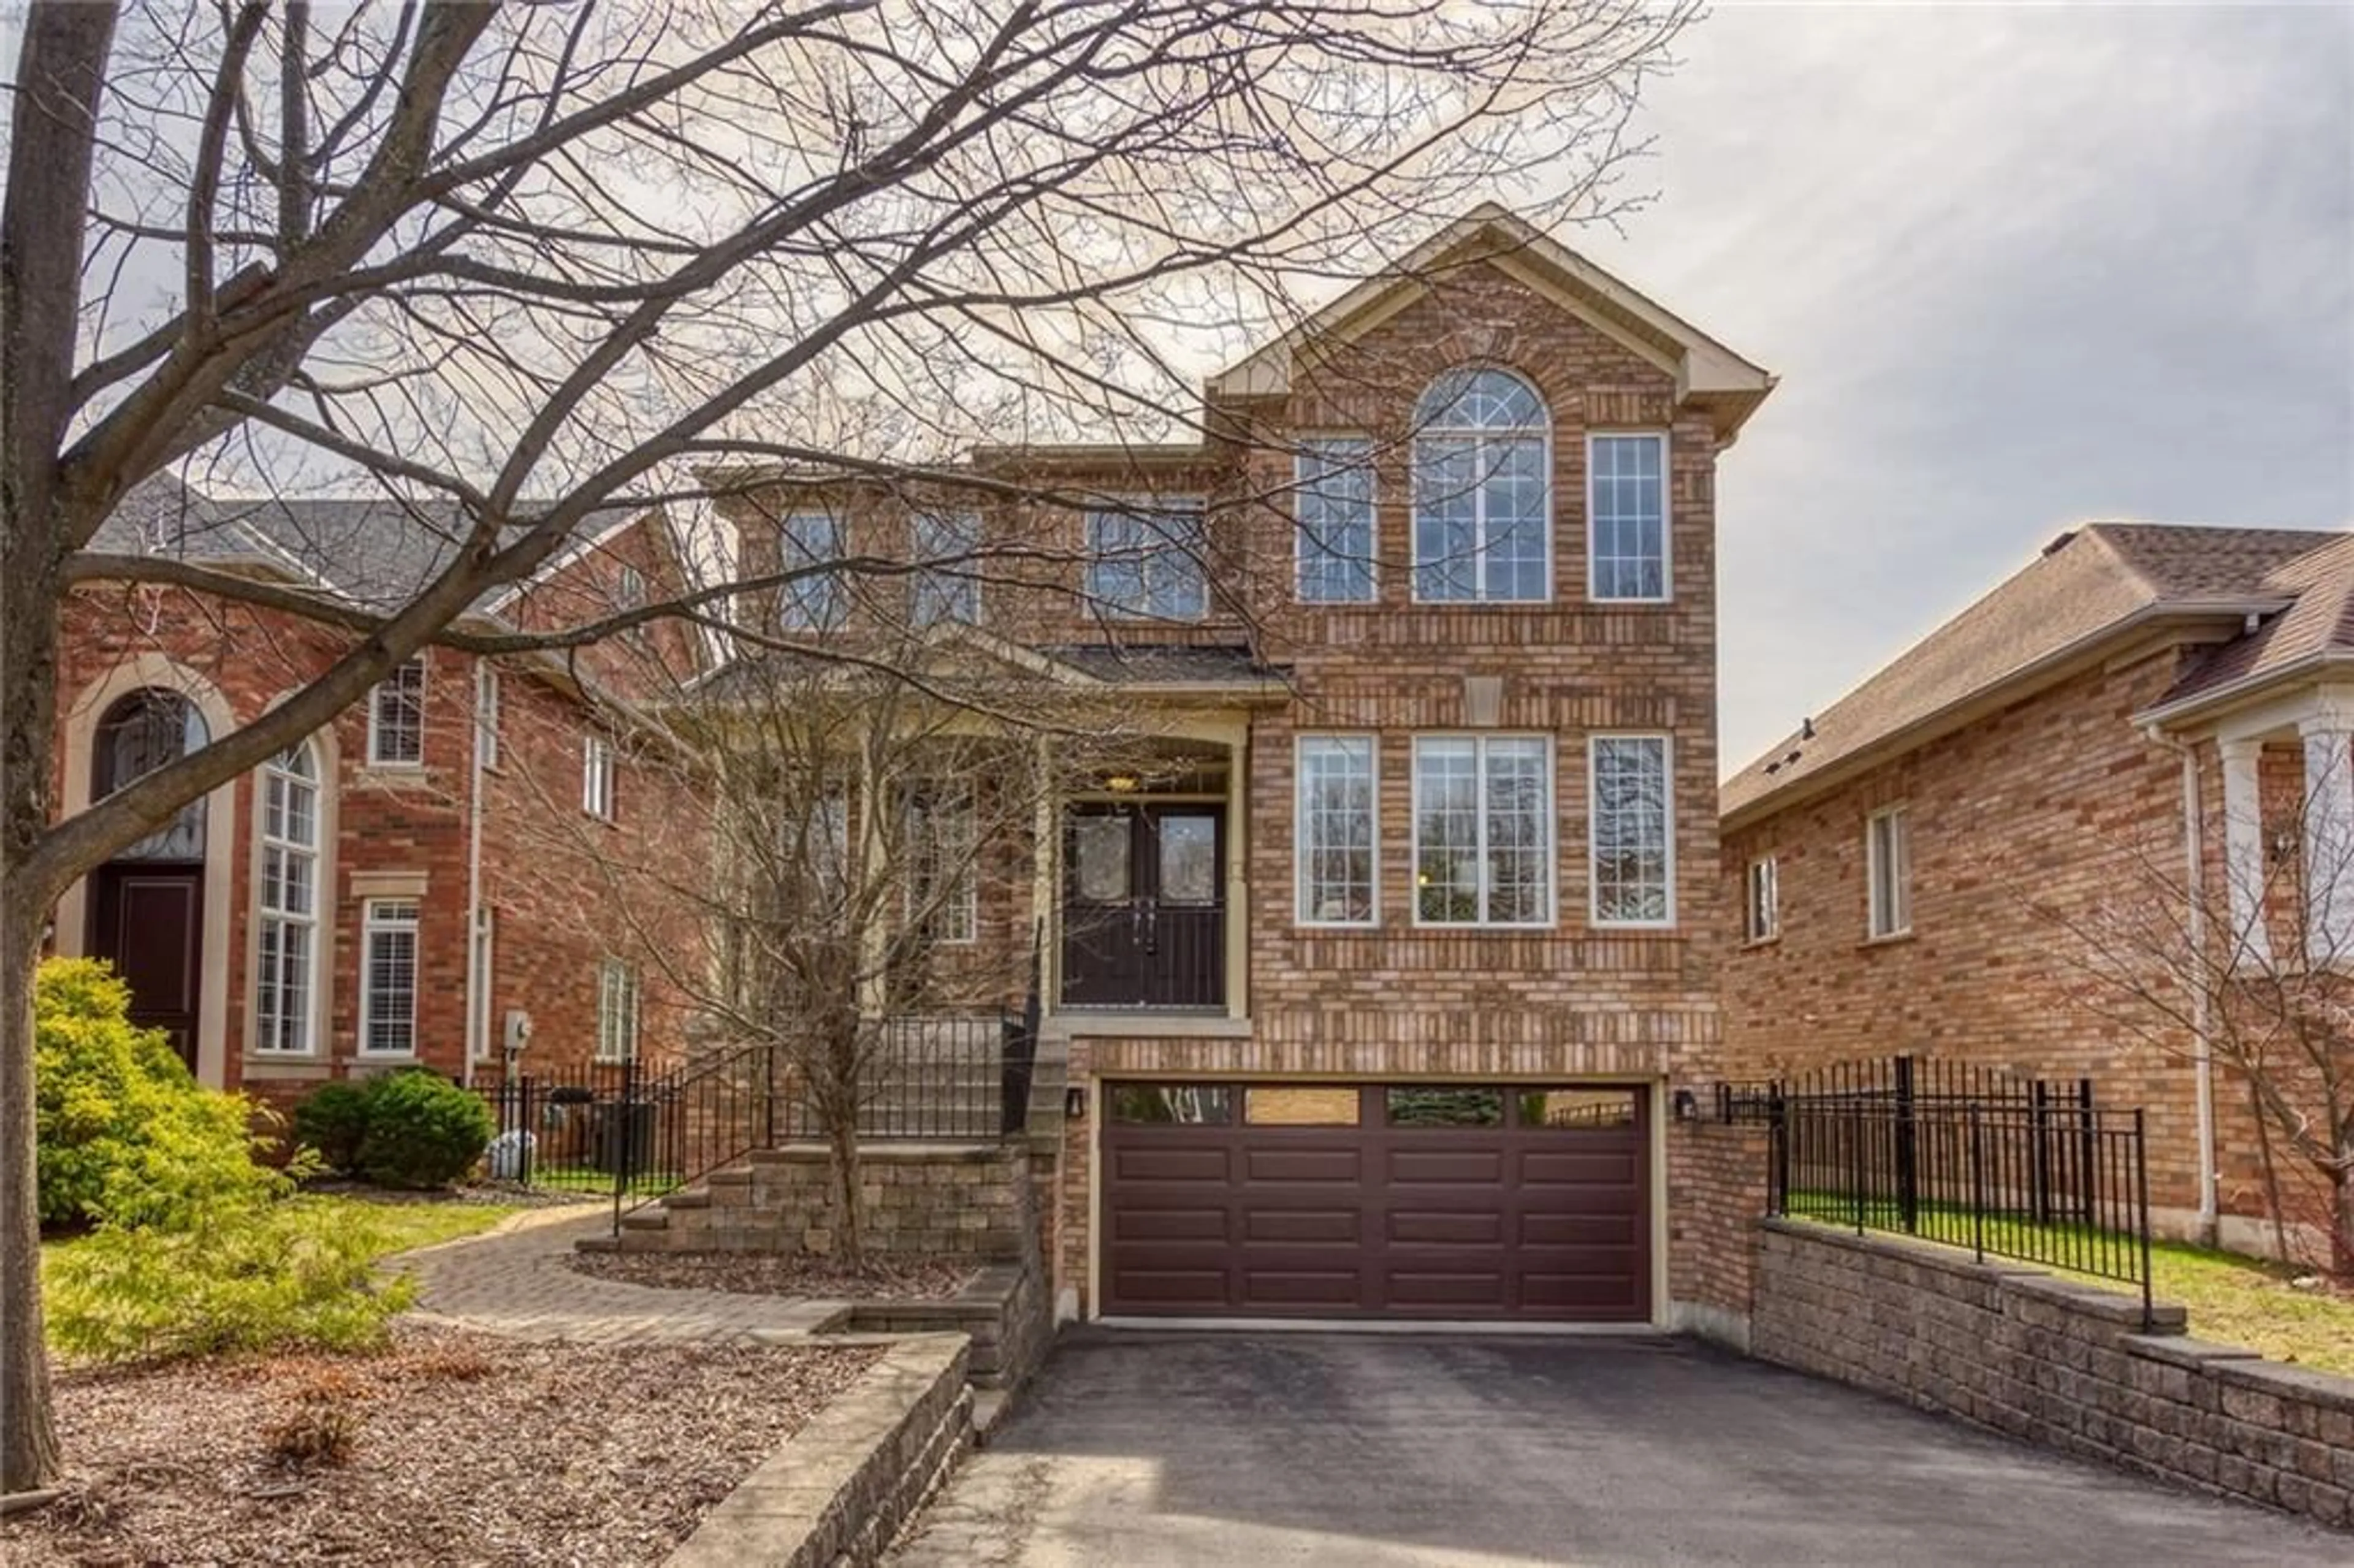 Home with brick exterior material for 2242 NIGHTINGALE Way, Oakville Ontario L6M 3S1